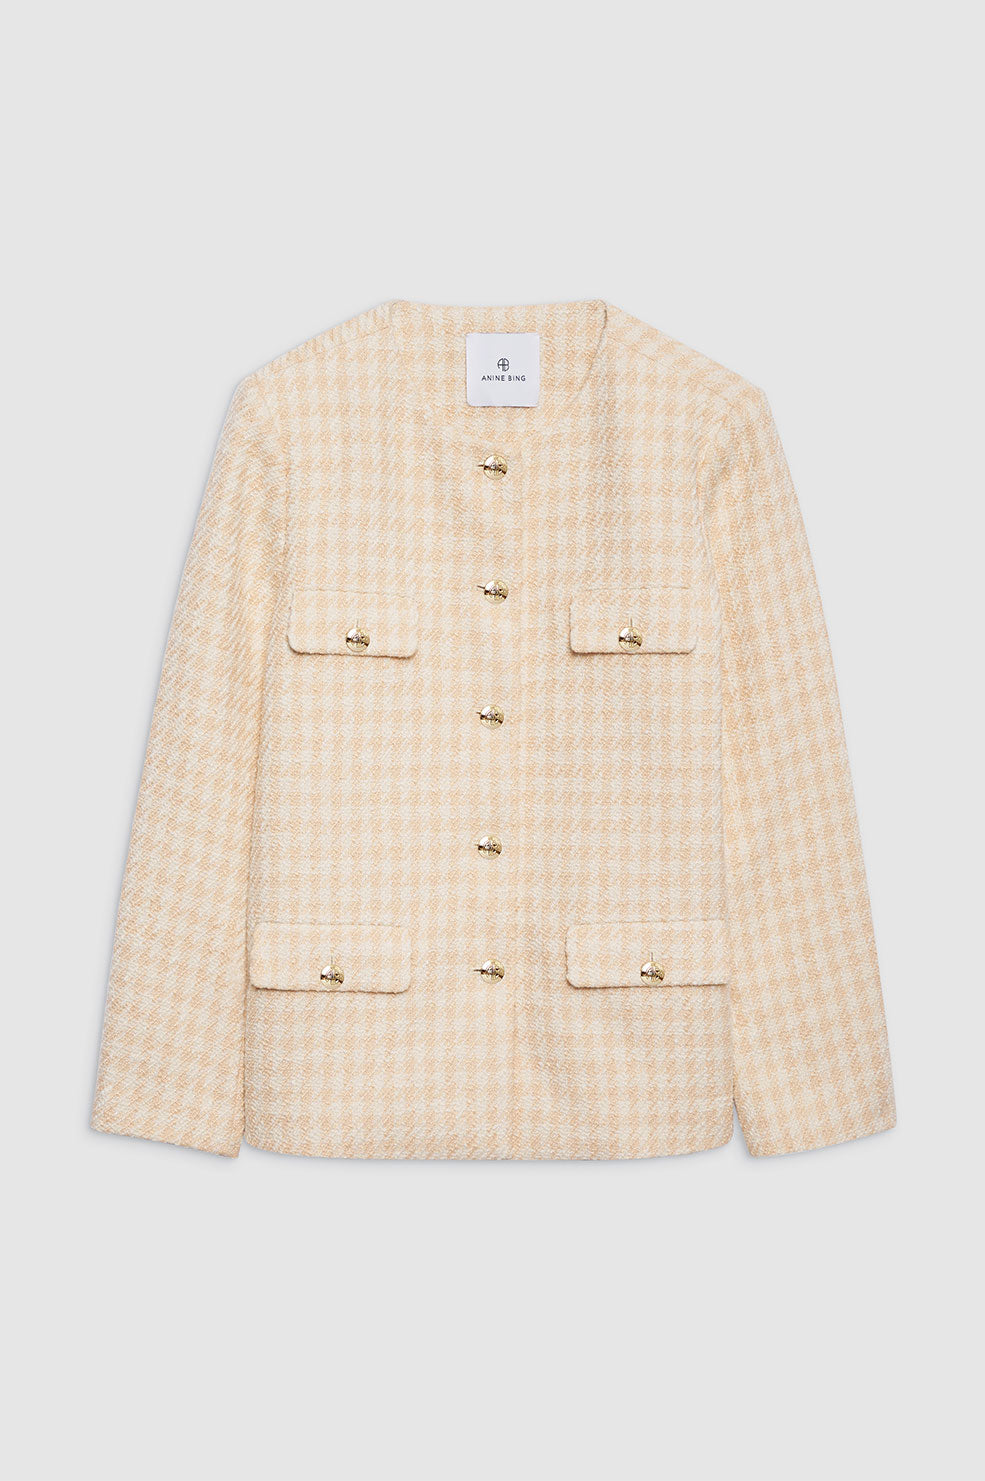 ANINE BING Janet Jacket - Cream And Peach Houndstooth - Front View